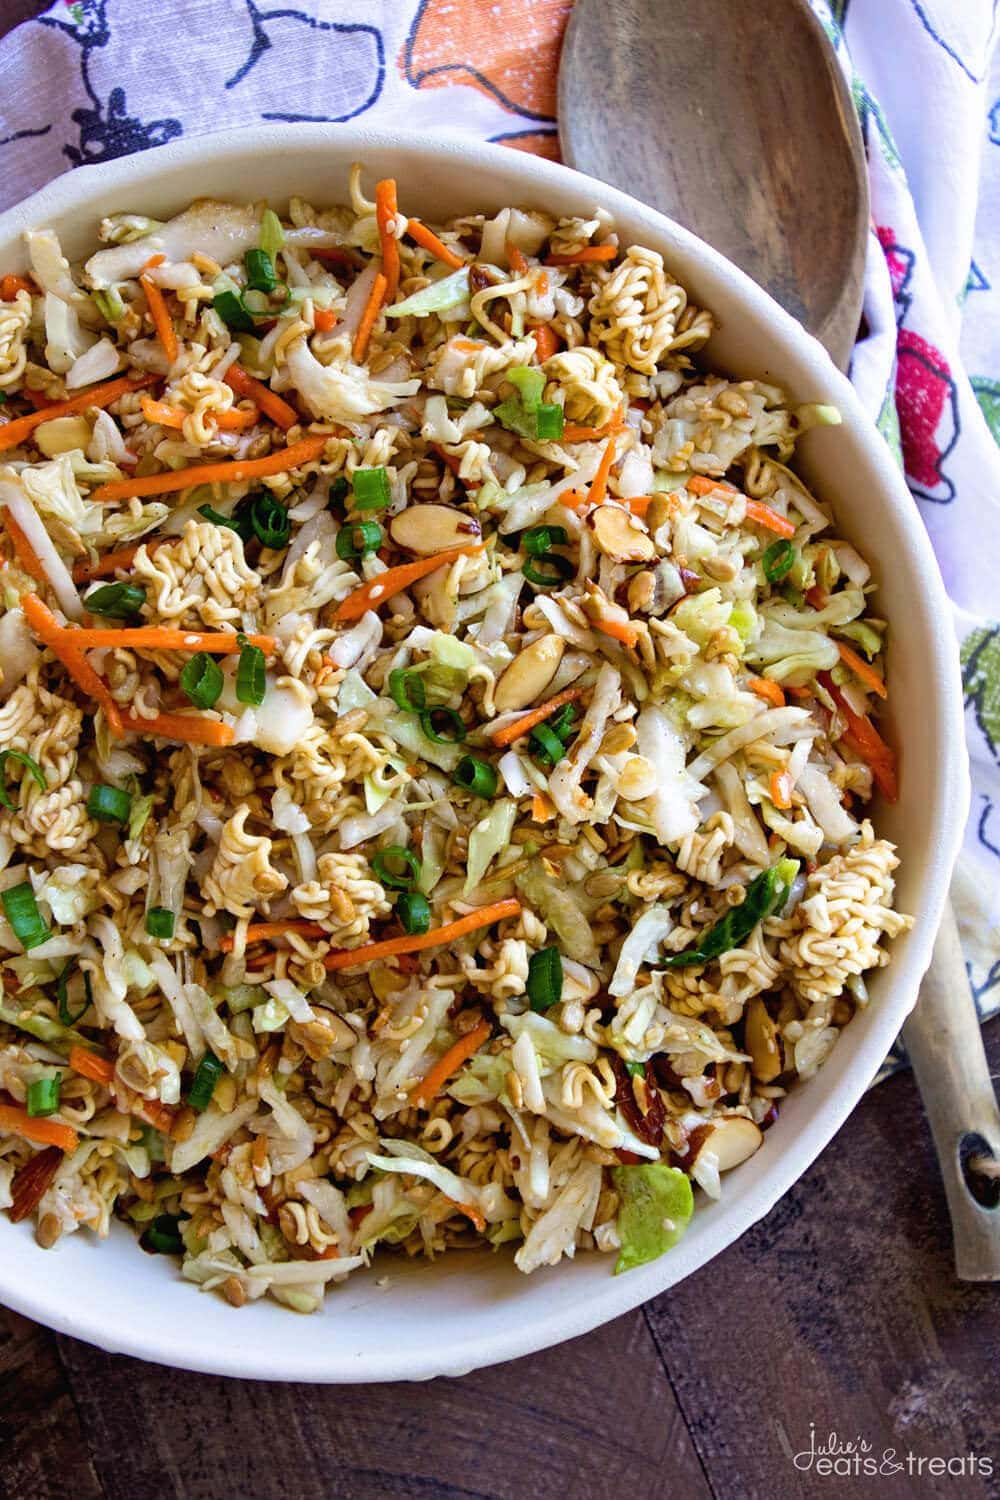 Asian Ramen Salad ~ Quick, Easy and Full of Flavor! It's the Perfect Potluck Salad and Only takes Minutes to Throw Together! Sweet, Savory and Delicious with the Perfect Amount of Crunch!